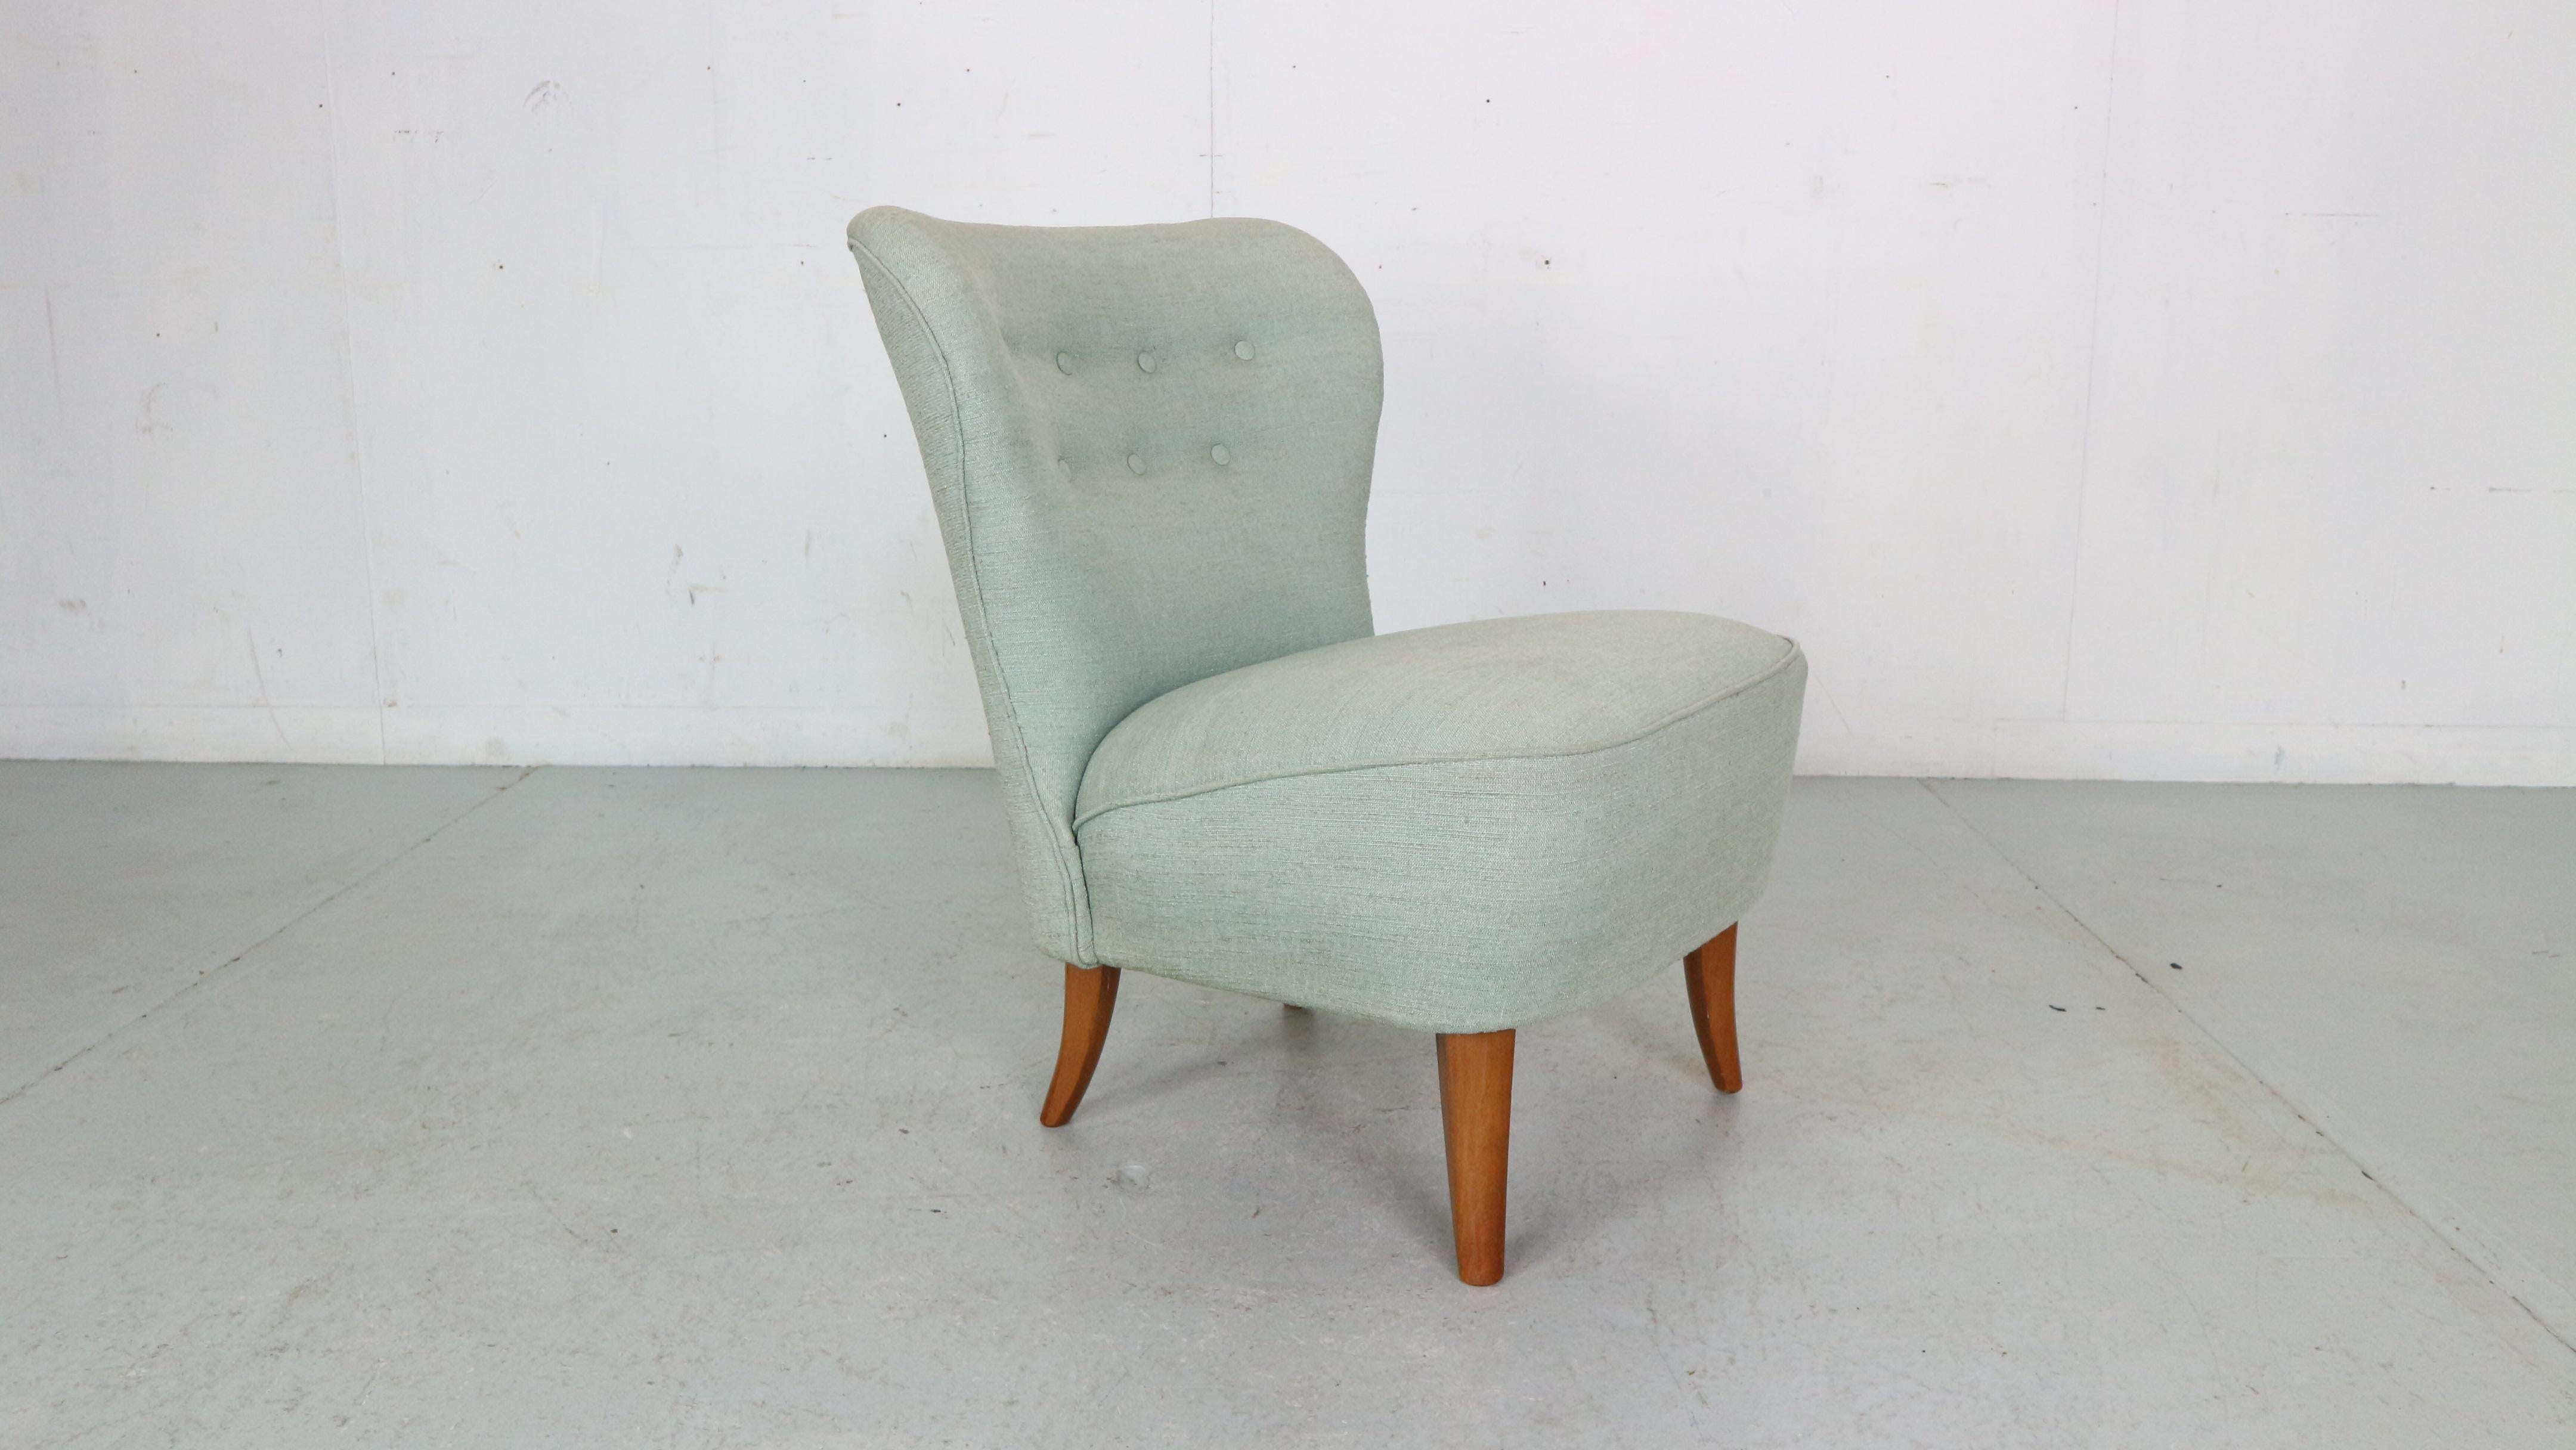 Mid-Century Modern period armless lounge chair designed by famous Dutch designer Theo Ruth and manufactured by Artifort, 1960's Netherlands.

Model 